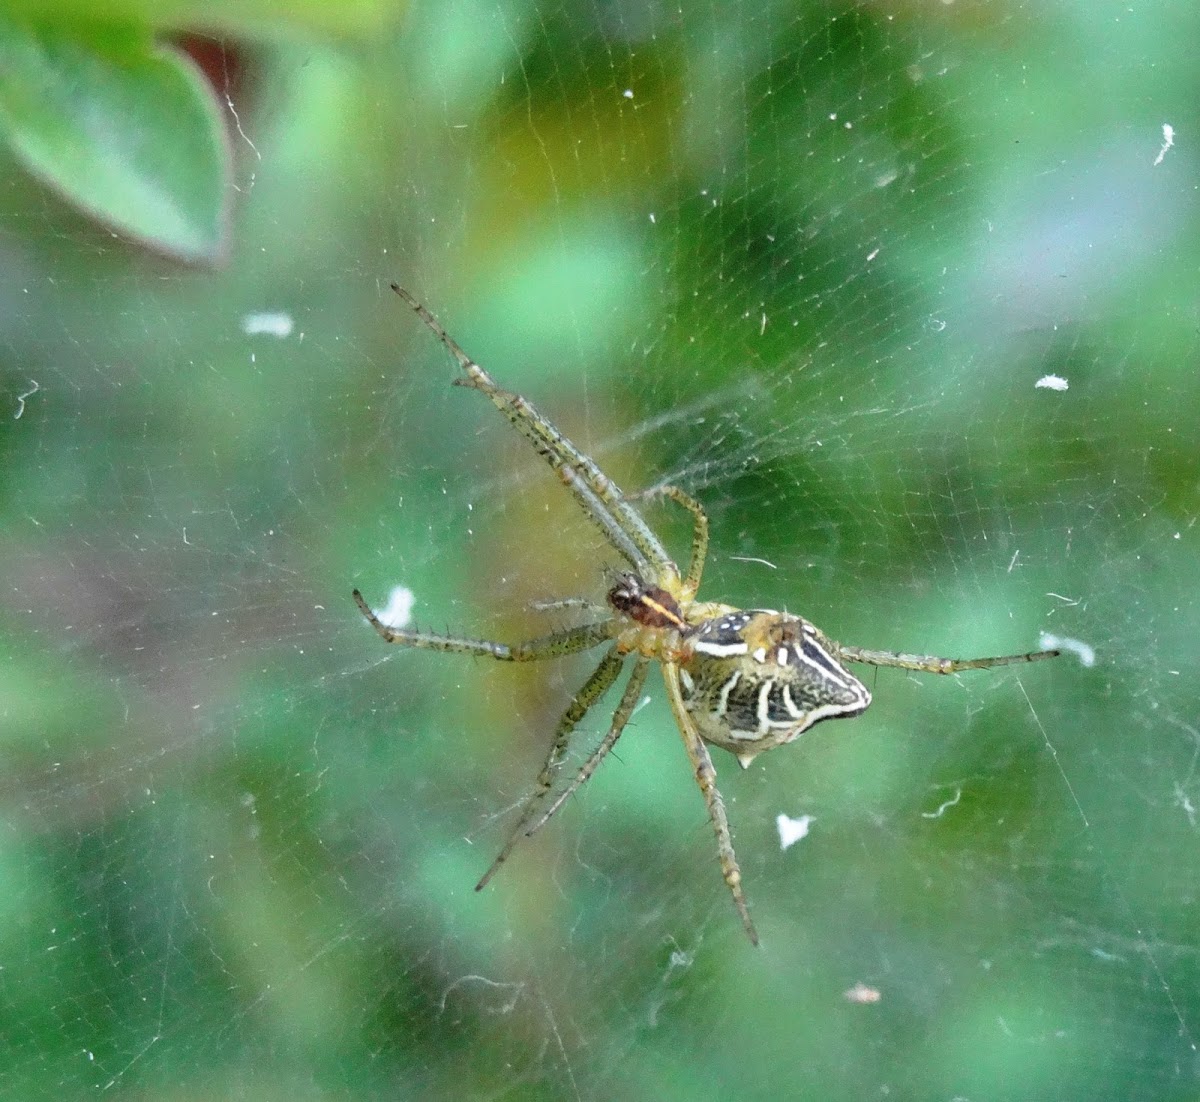 Tent Spider with egg sacs